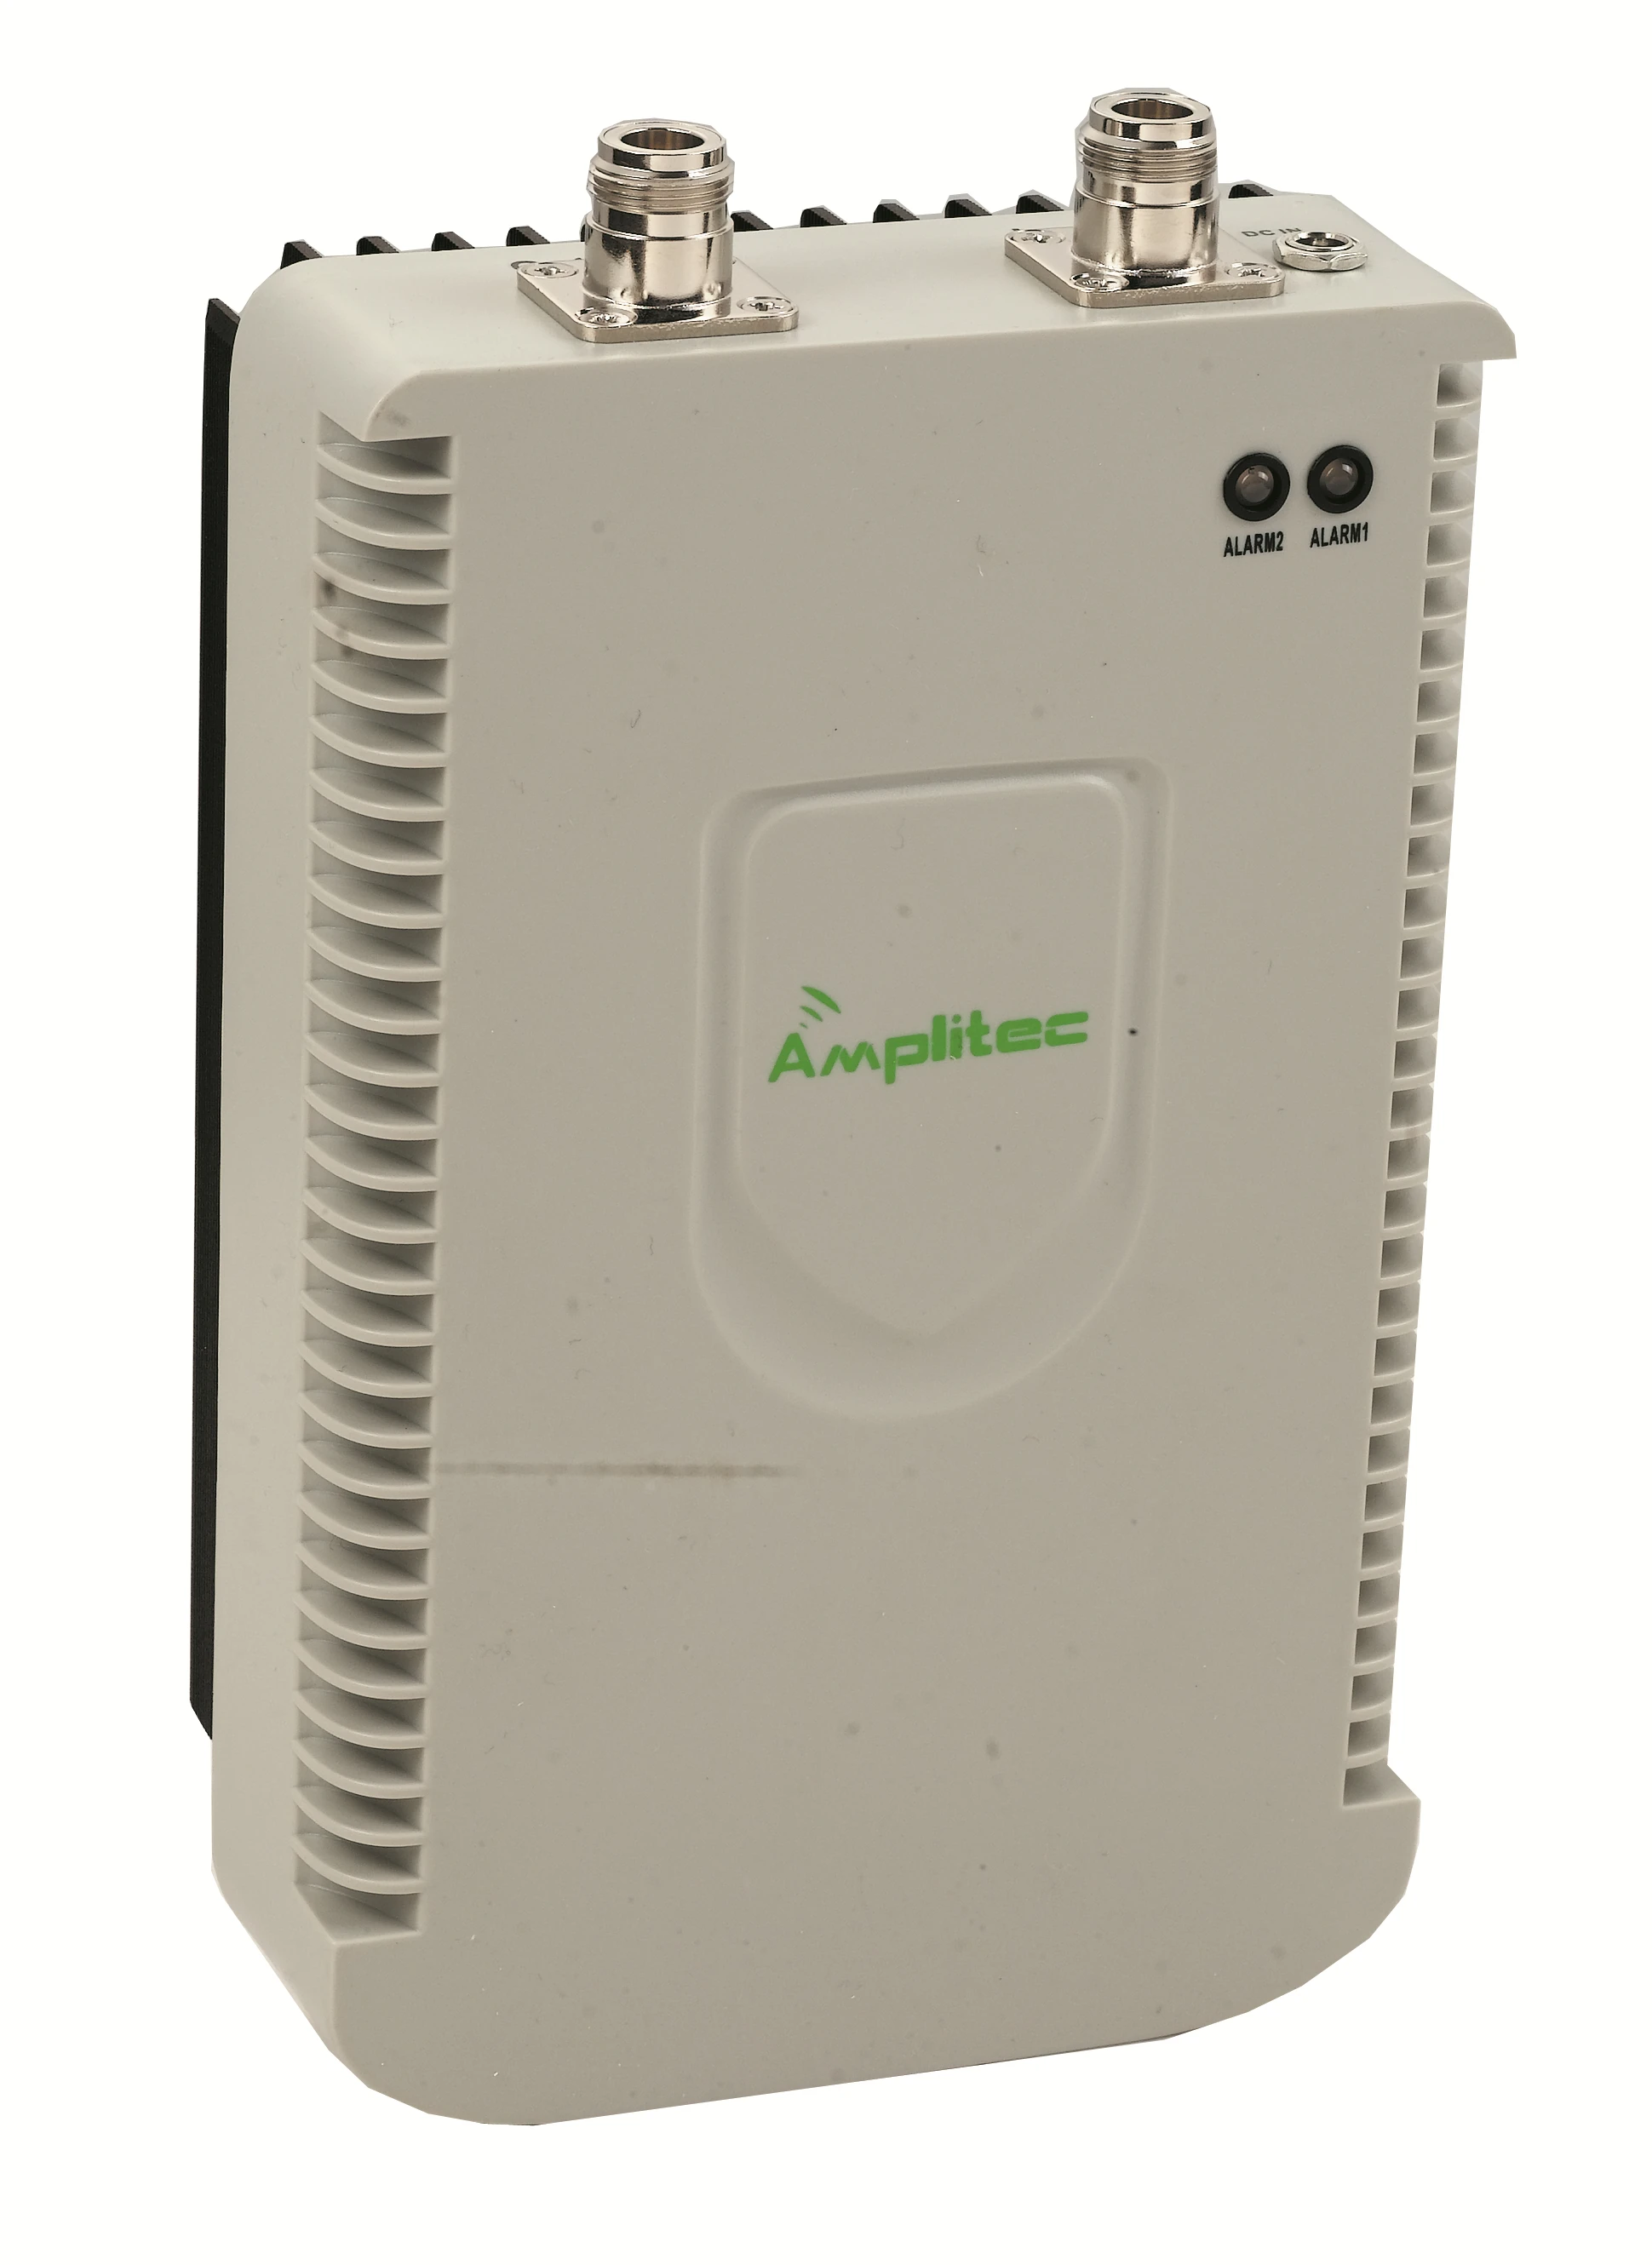 Hot Selling Amplitec 4G Mini Pico Repeater LTE 1800MHz Mobile Signal Booster / Amplifier